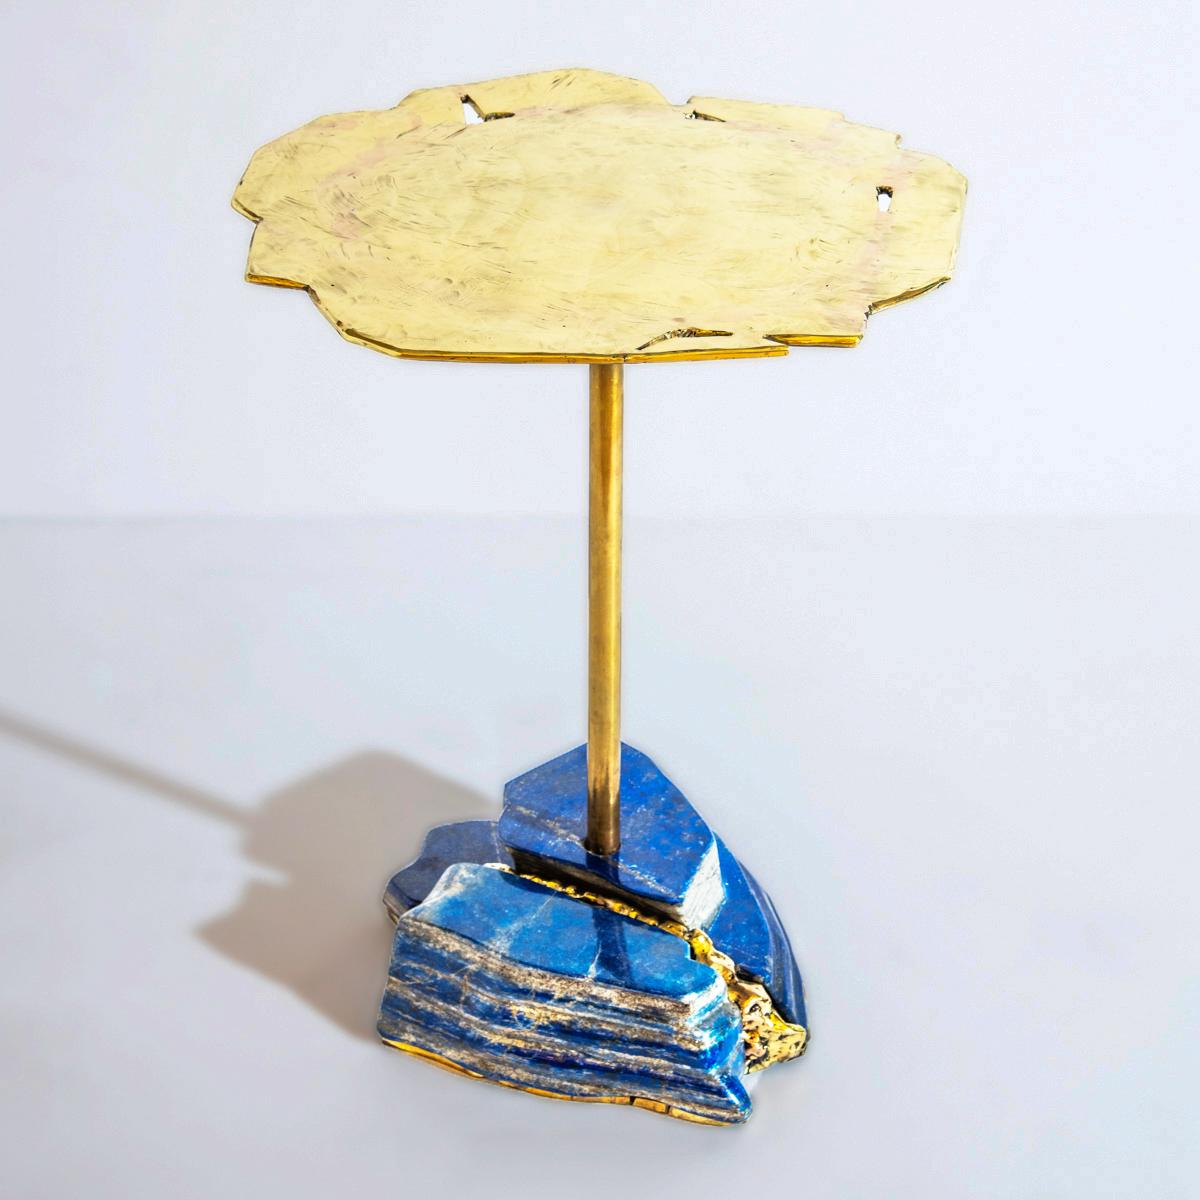 The Pietra side table is constructed on a lapis lazuli base created from several pieces of the precious stone and forged brass filling the gaps between them. The organic brass top is hand sculpted to create an undulating effect. Base composition and